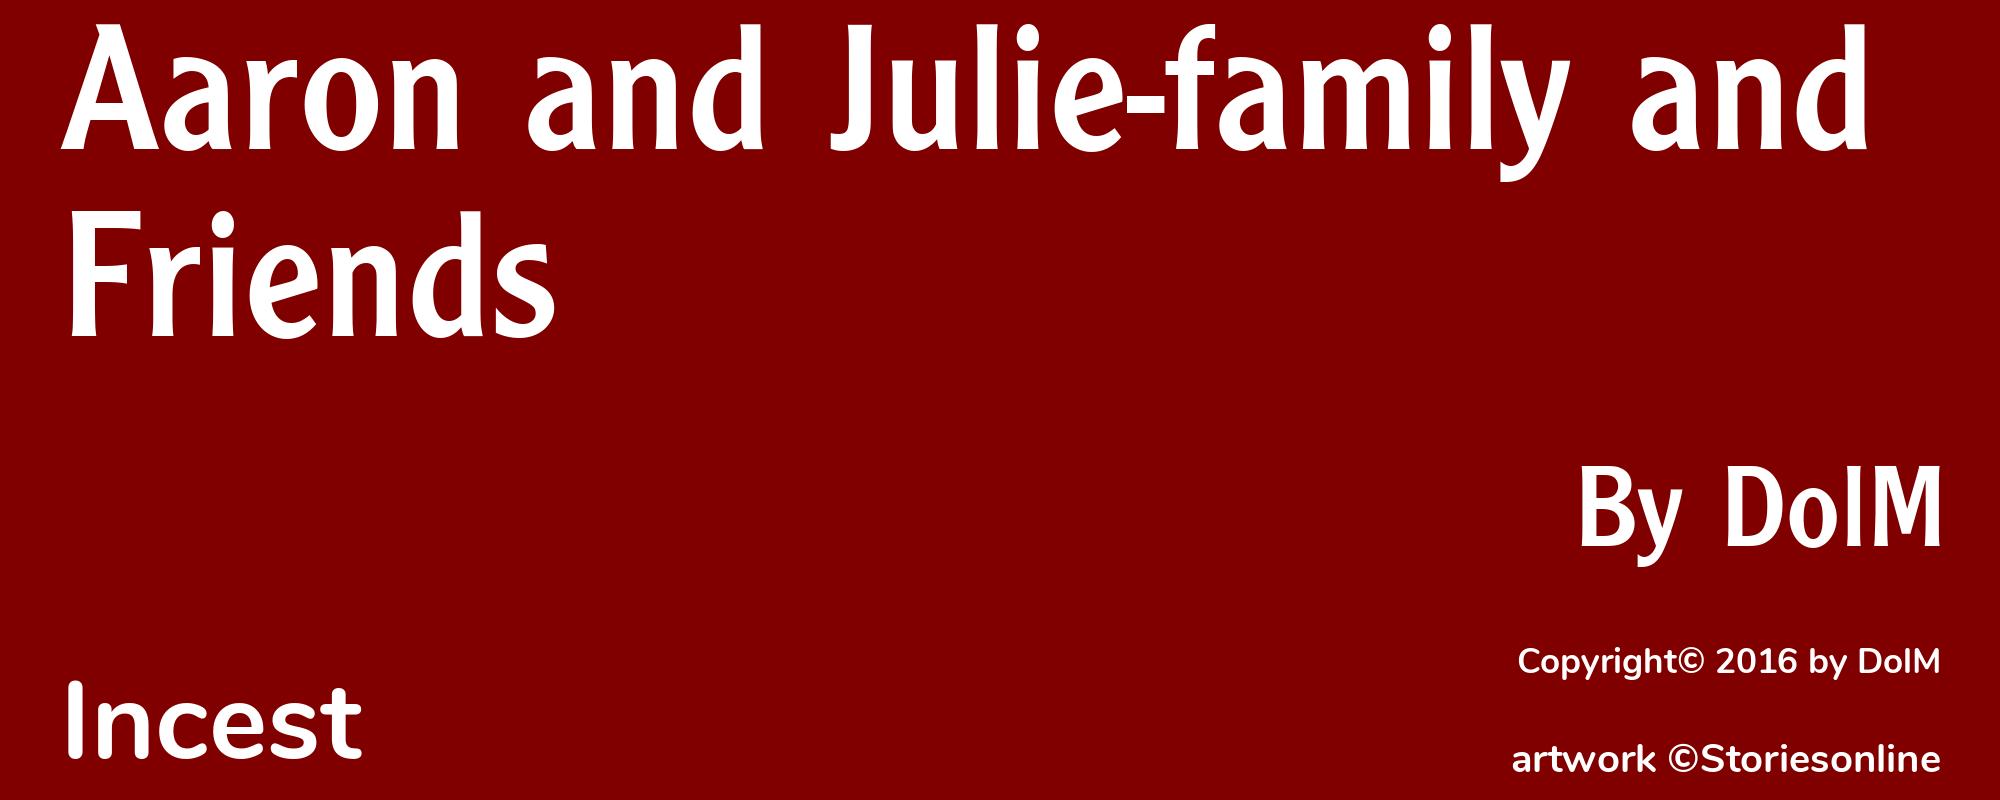 Aaron and Julie-family and Friends - Cover